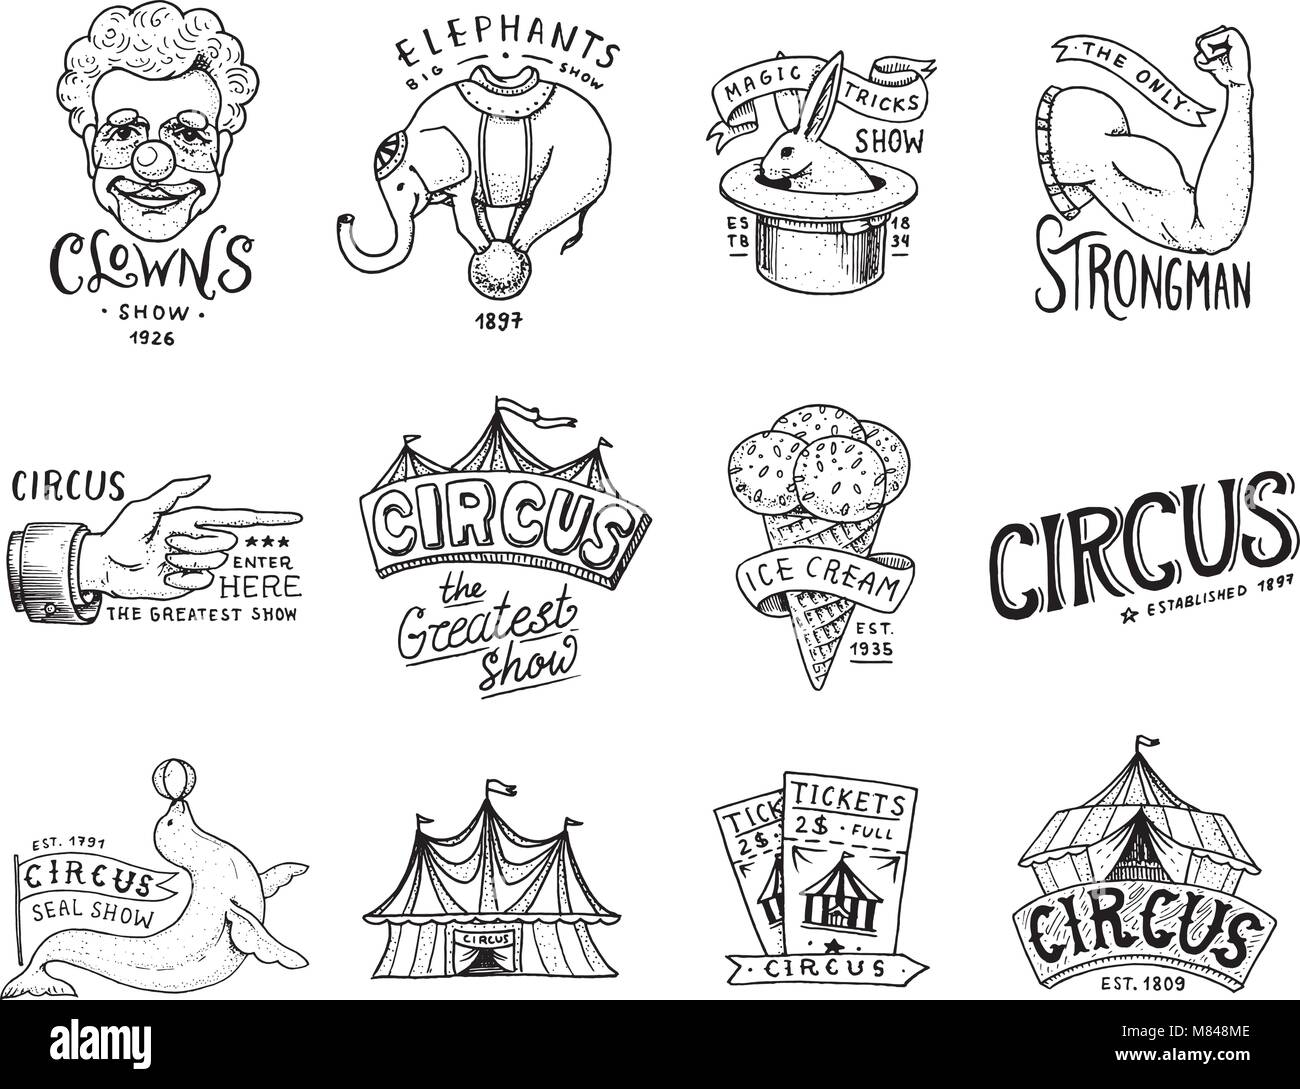 Carnival Circus badge. Harlequin with animals. clown and elephant, ice cream, magic focus in the tent. funnyman funster or freak. festival with actors. engraved emblem hand drawn. theater and marquee. Stock Vector